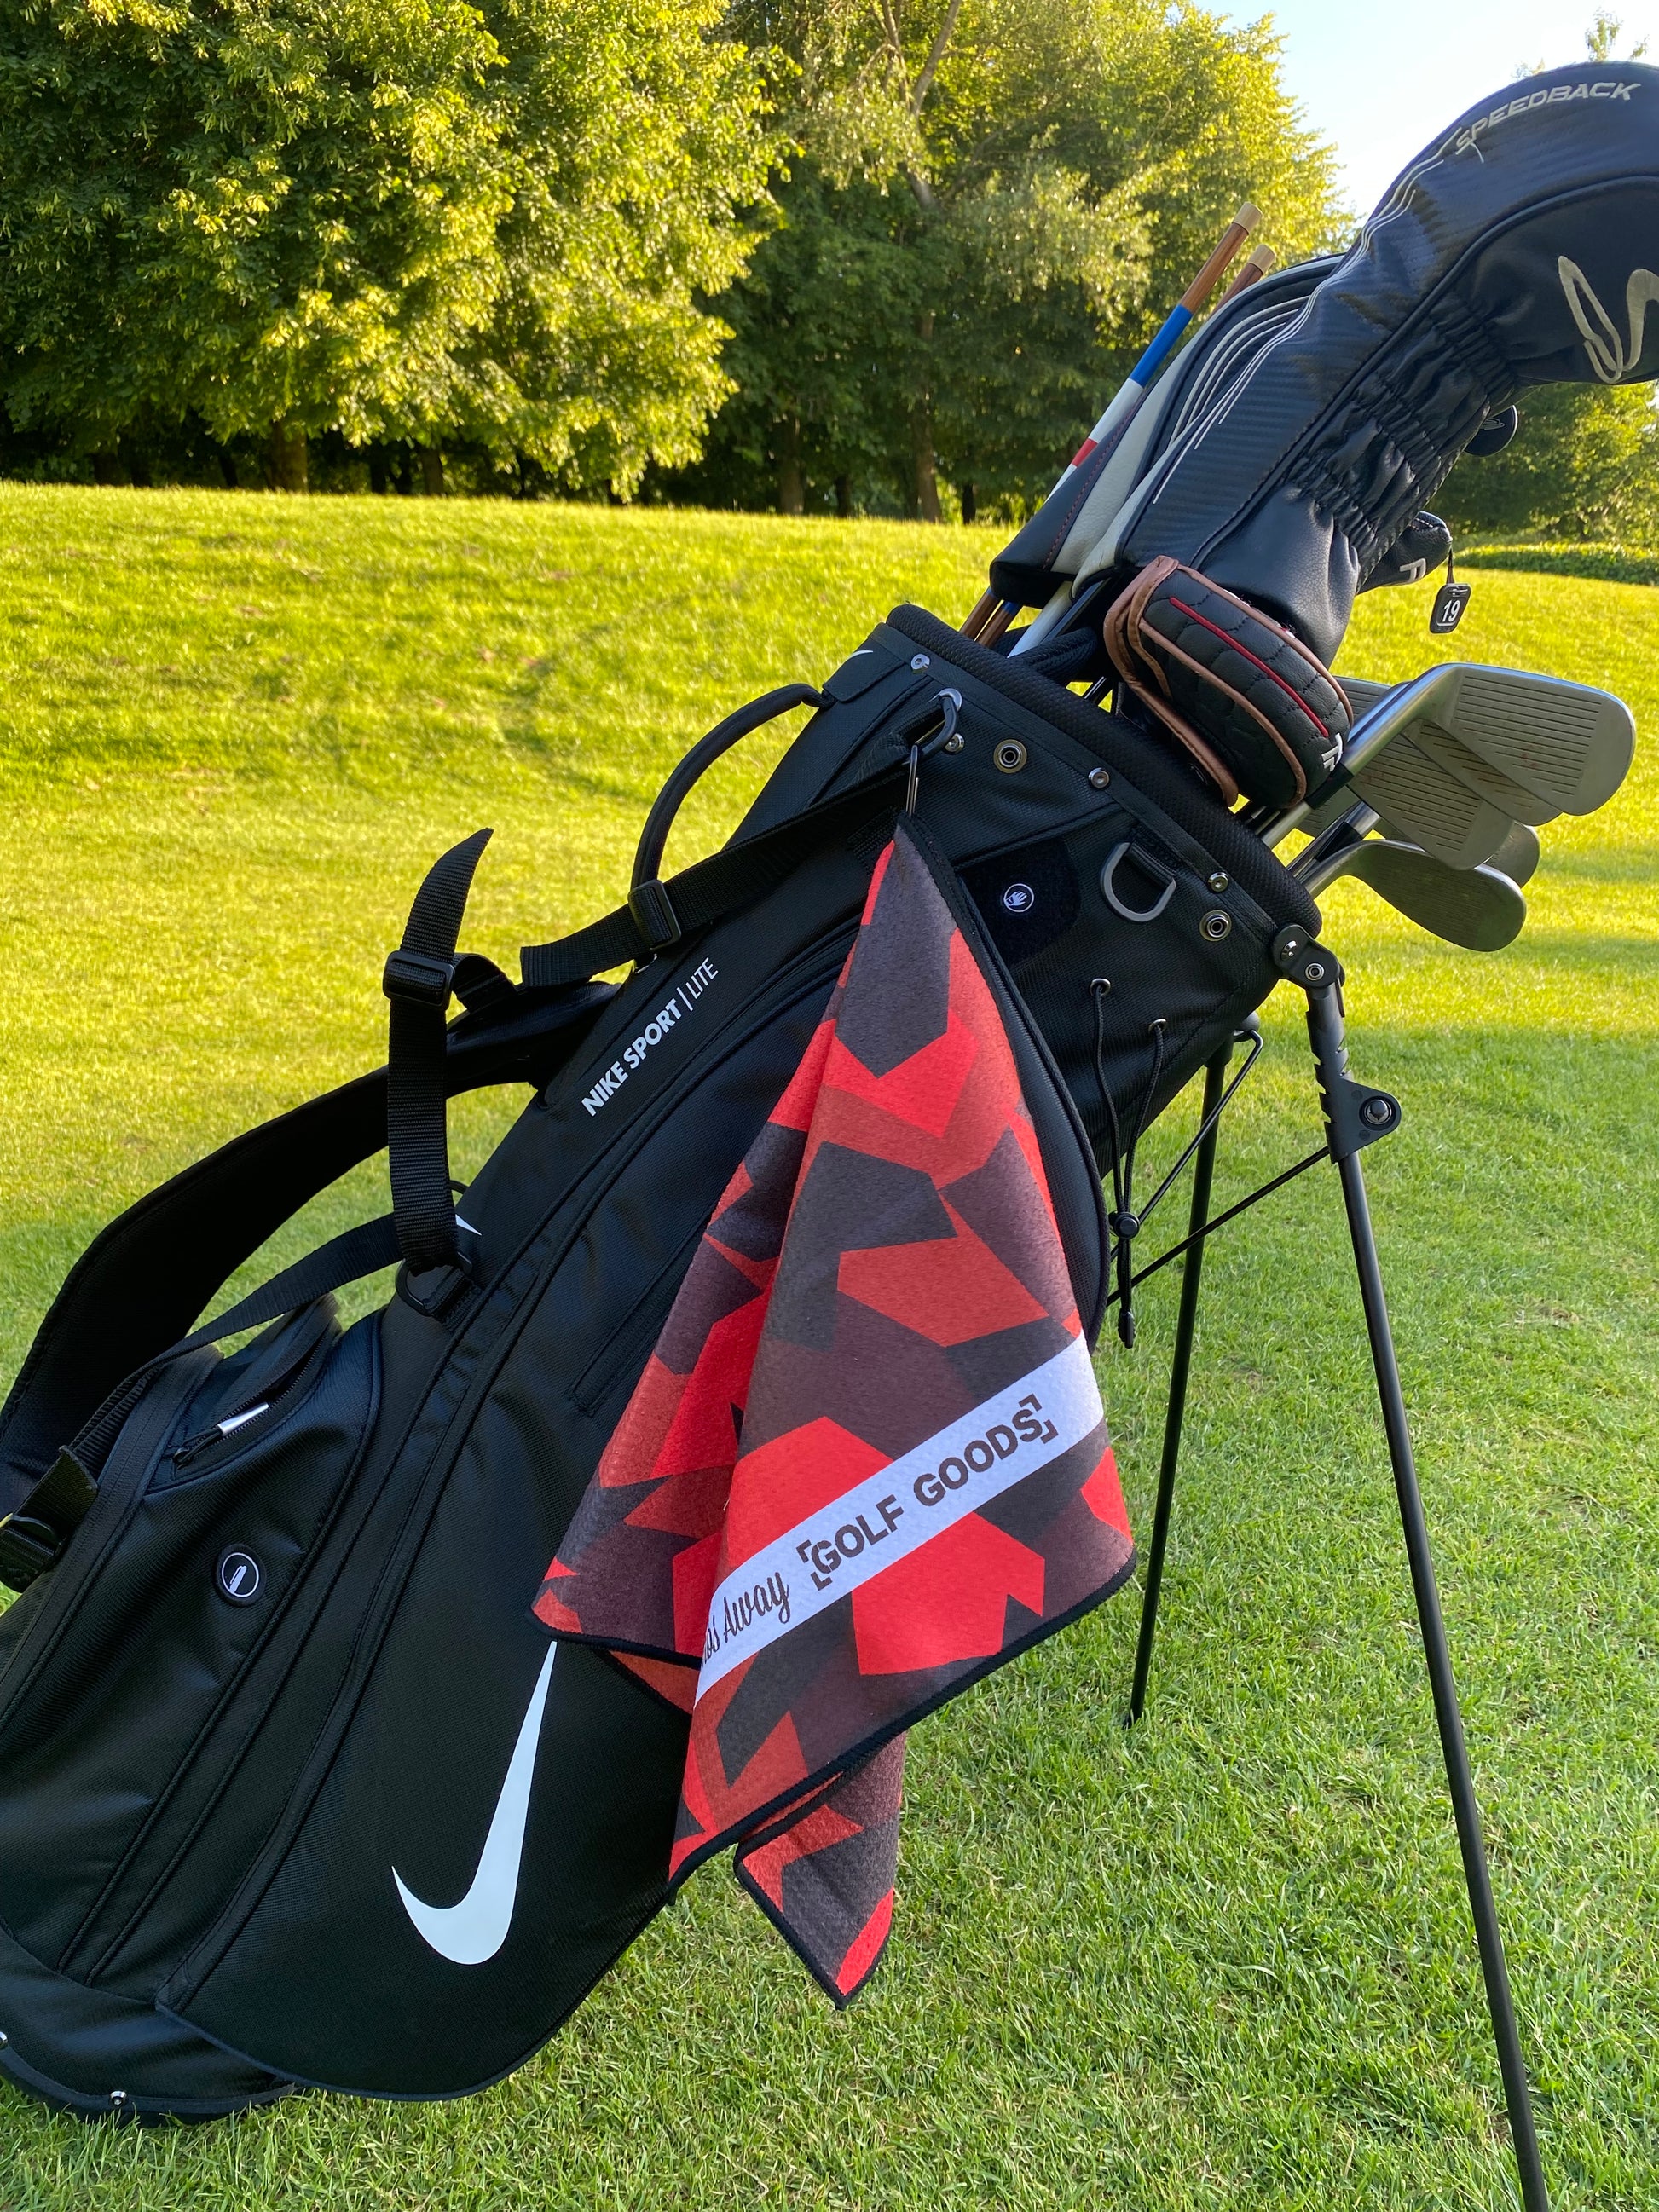 Red golf towel